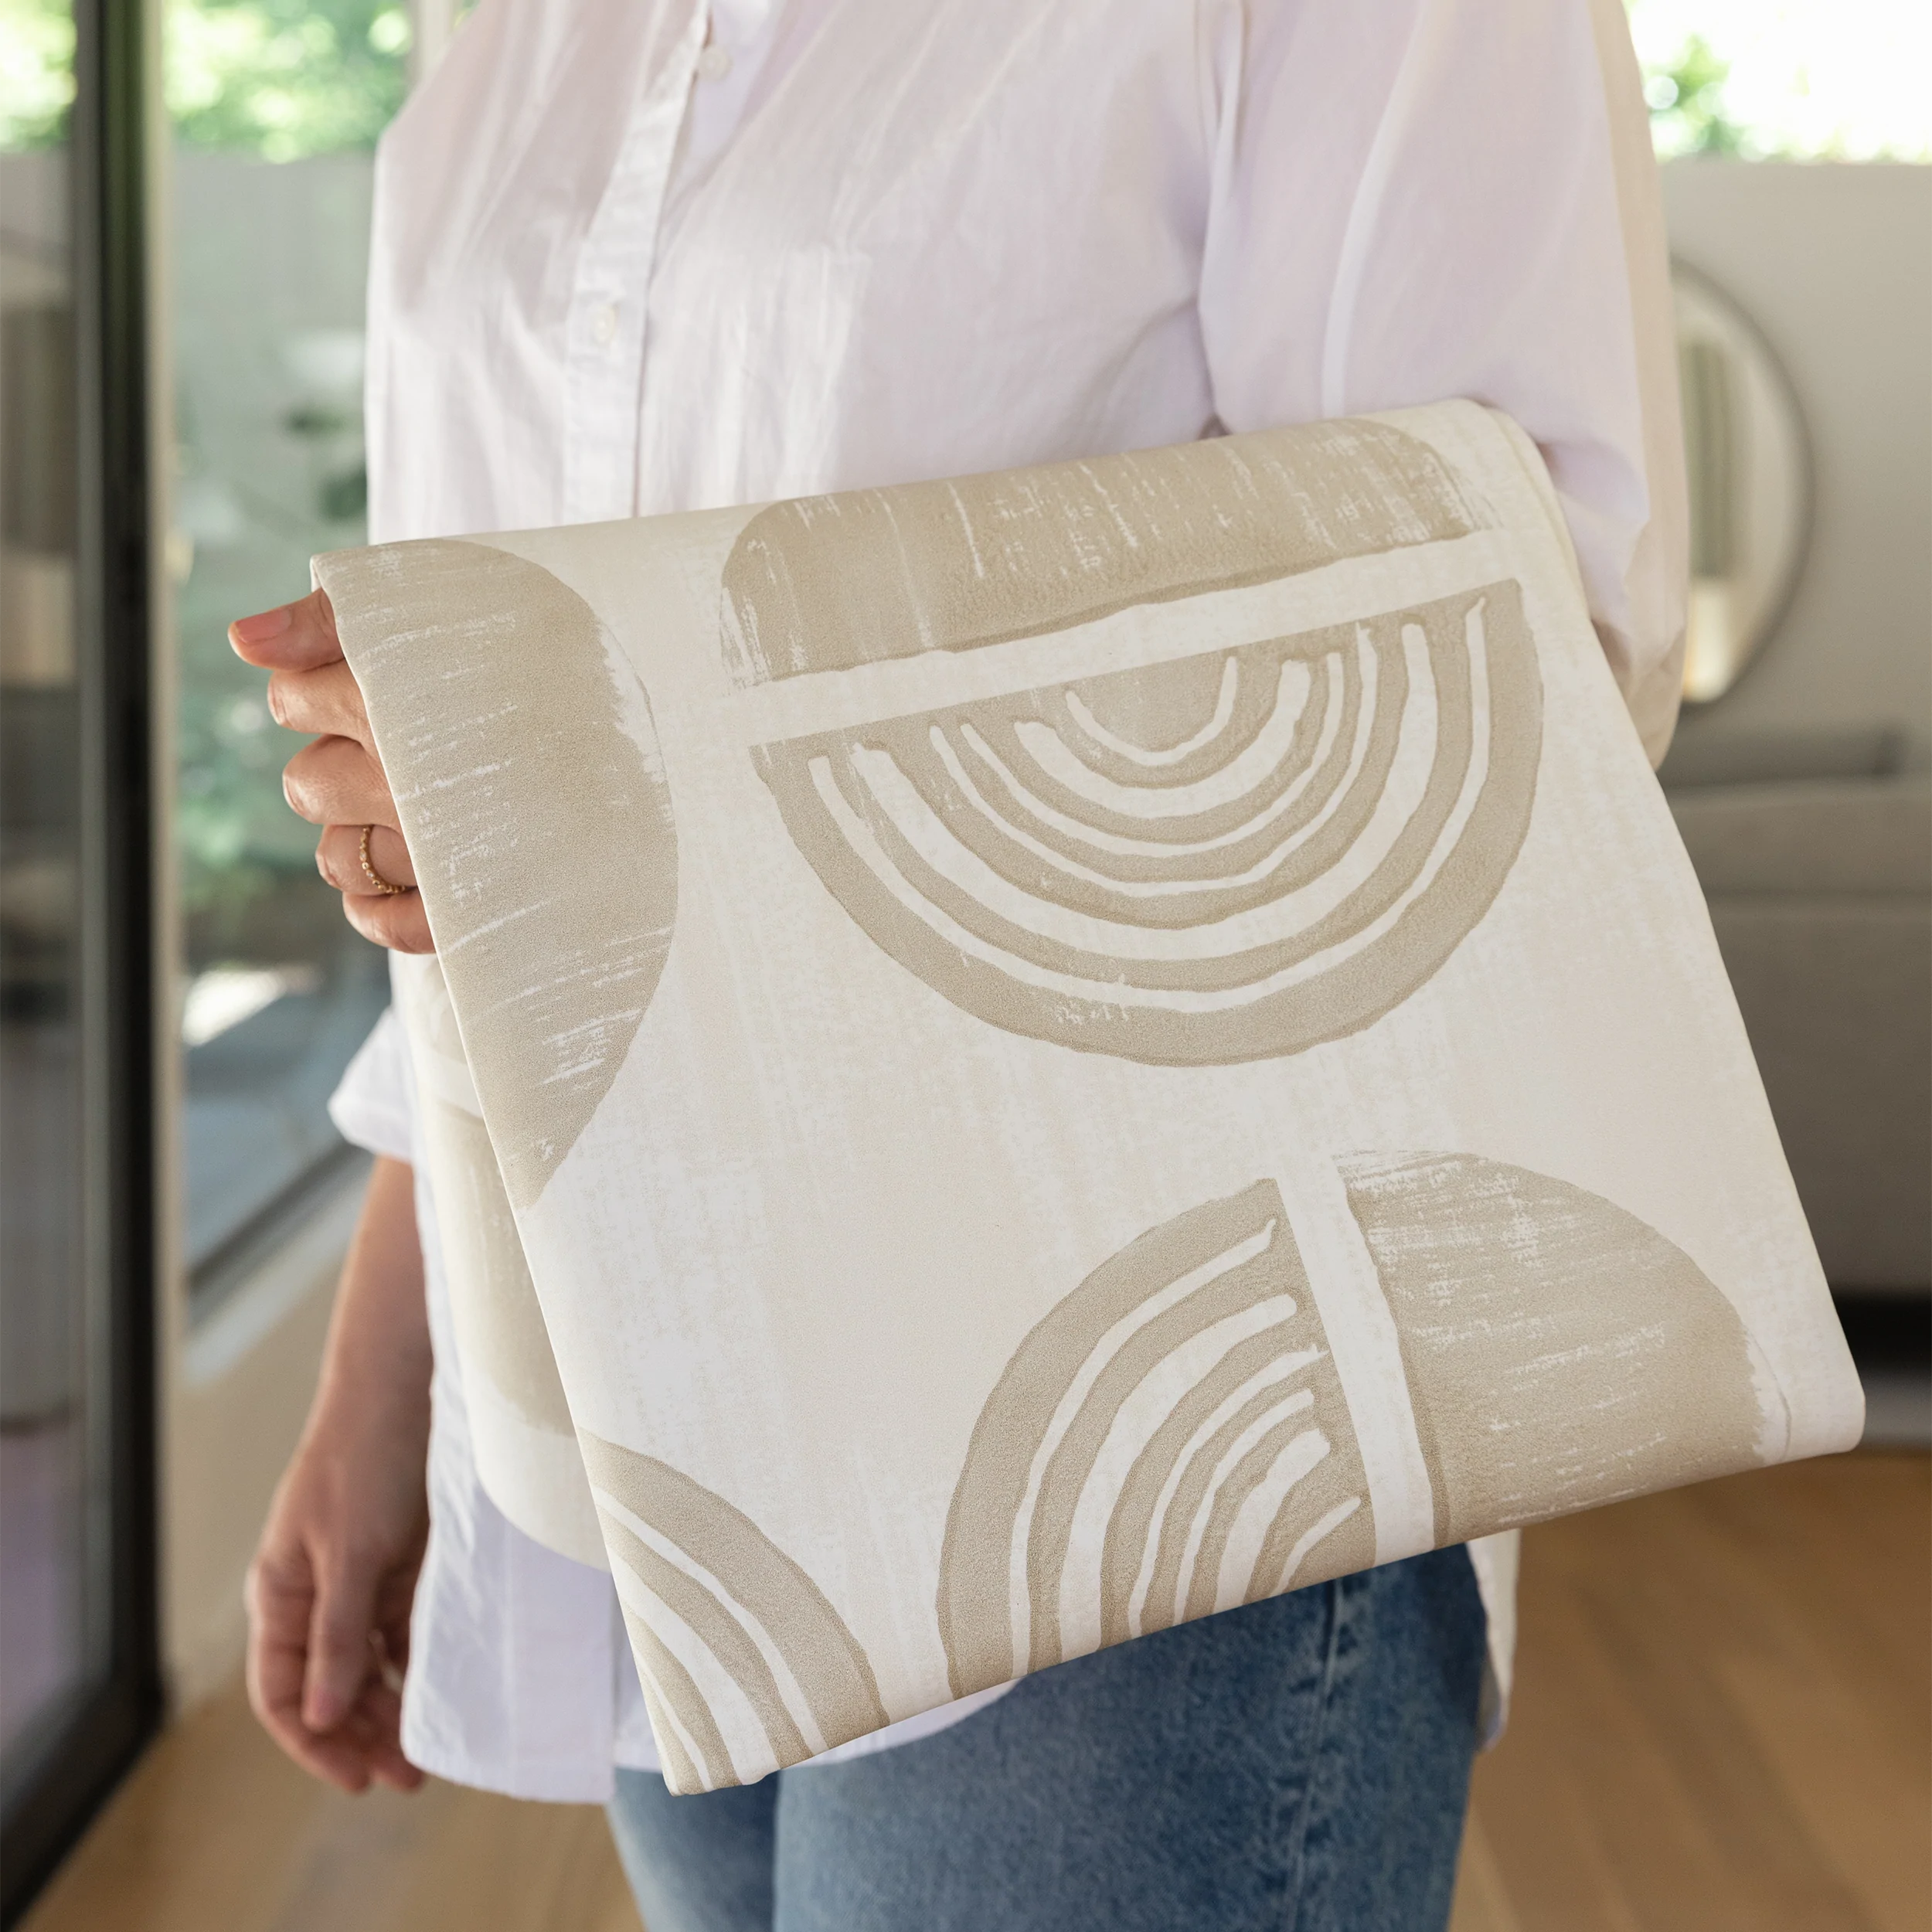 Ada modern minimalist baby high chair mat in Pebble taupe and off white shown folded up being carried by a woman.